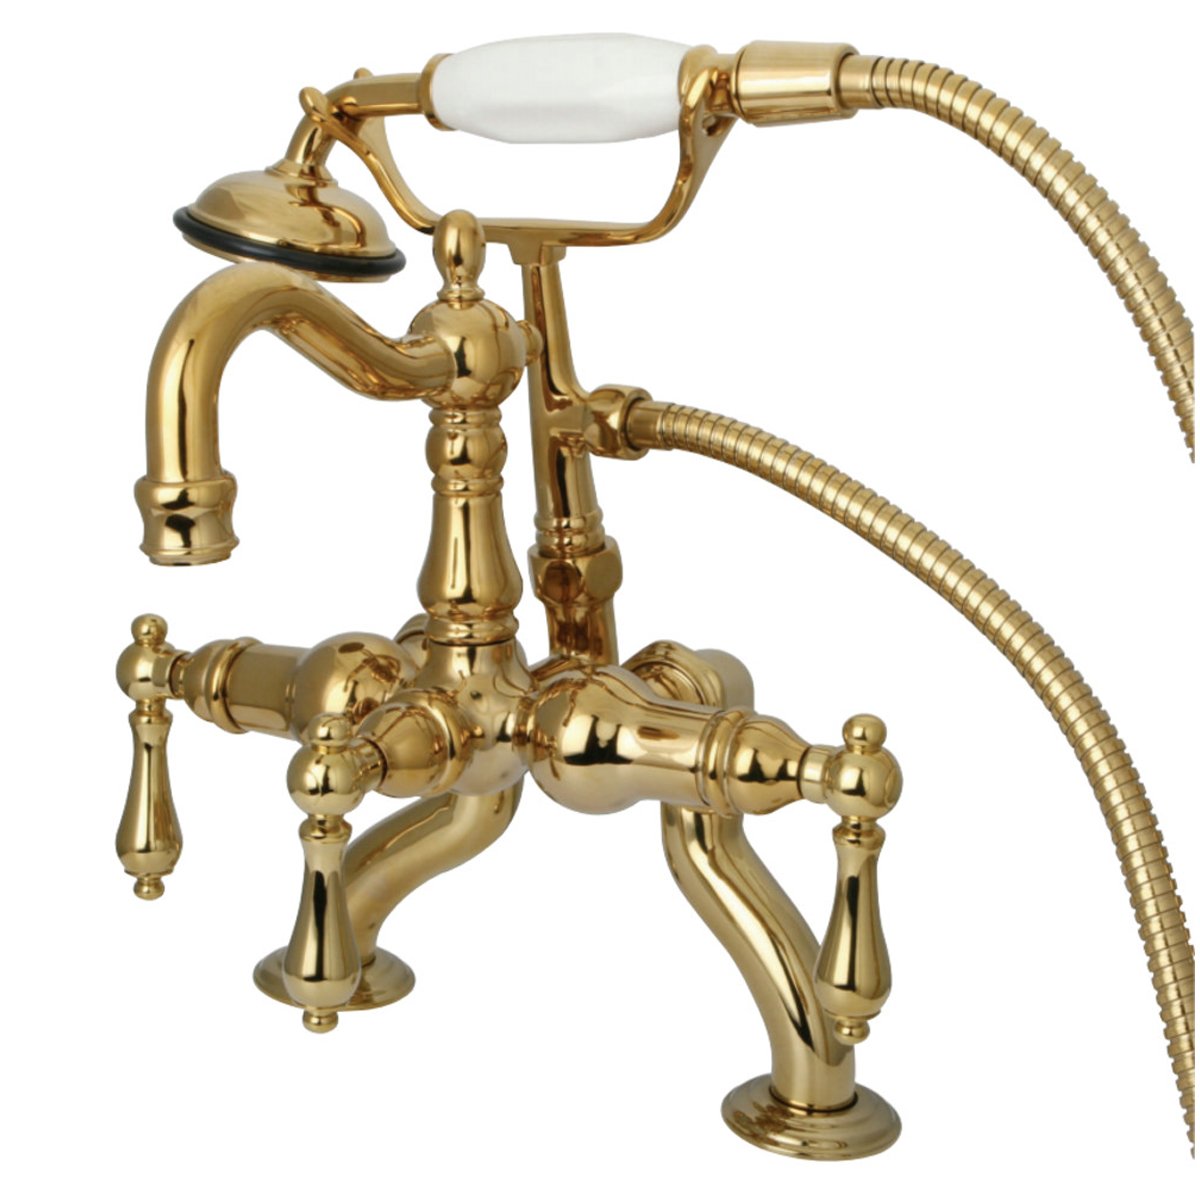 Kingston Brass CC2007TX-P Vintage Clawfoot  11" x 6" x 4.75" Tub Faucet with Hand Shower